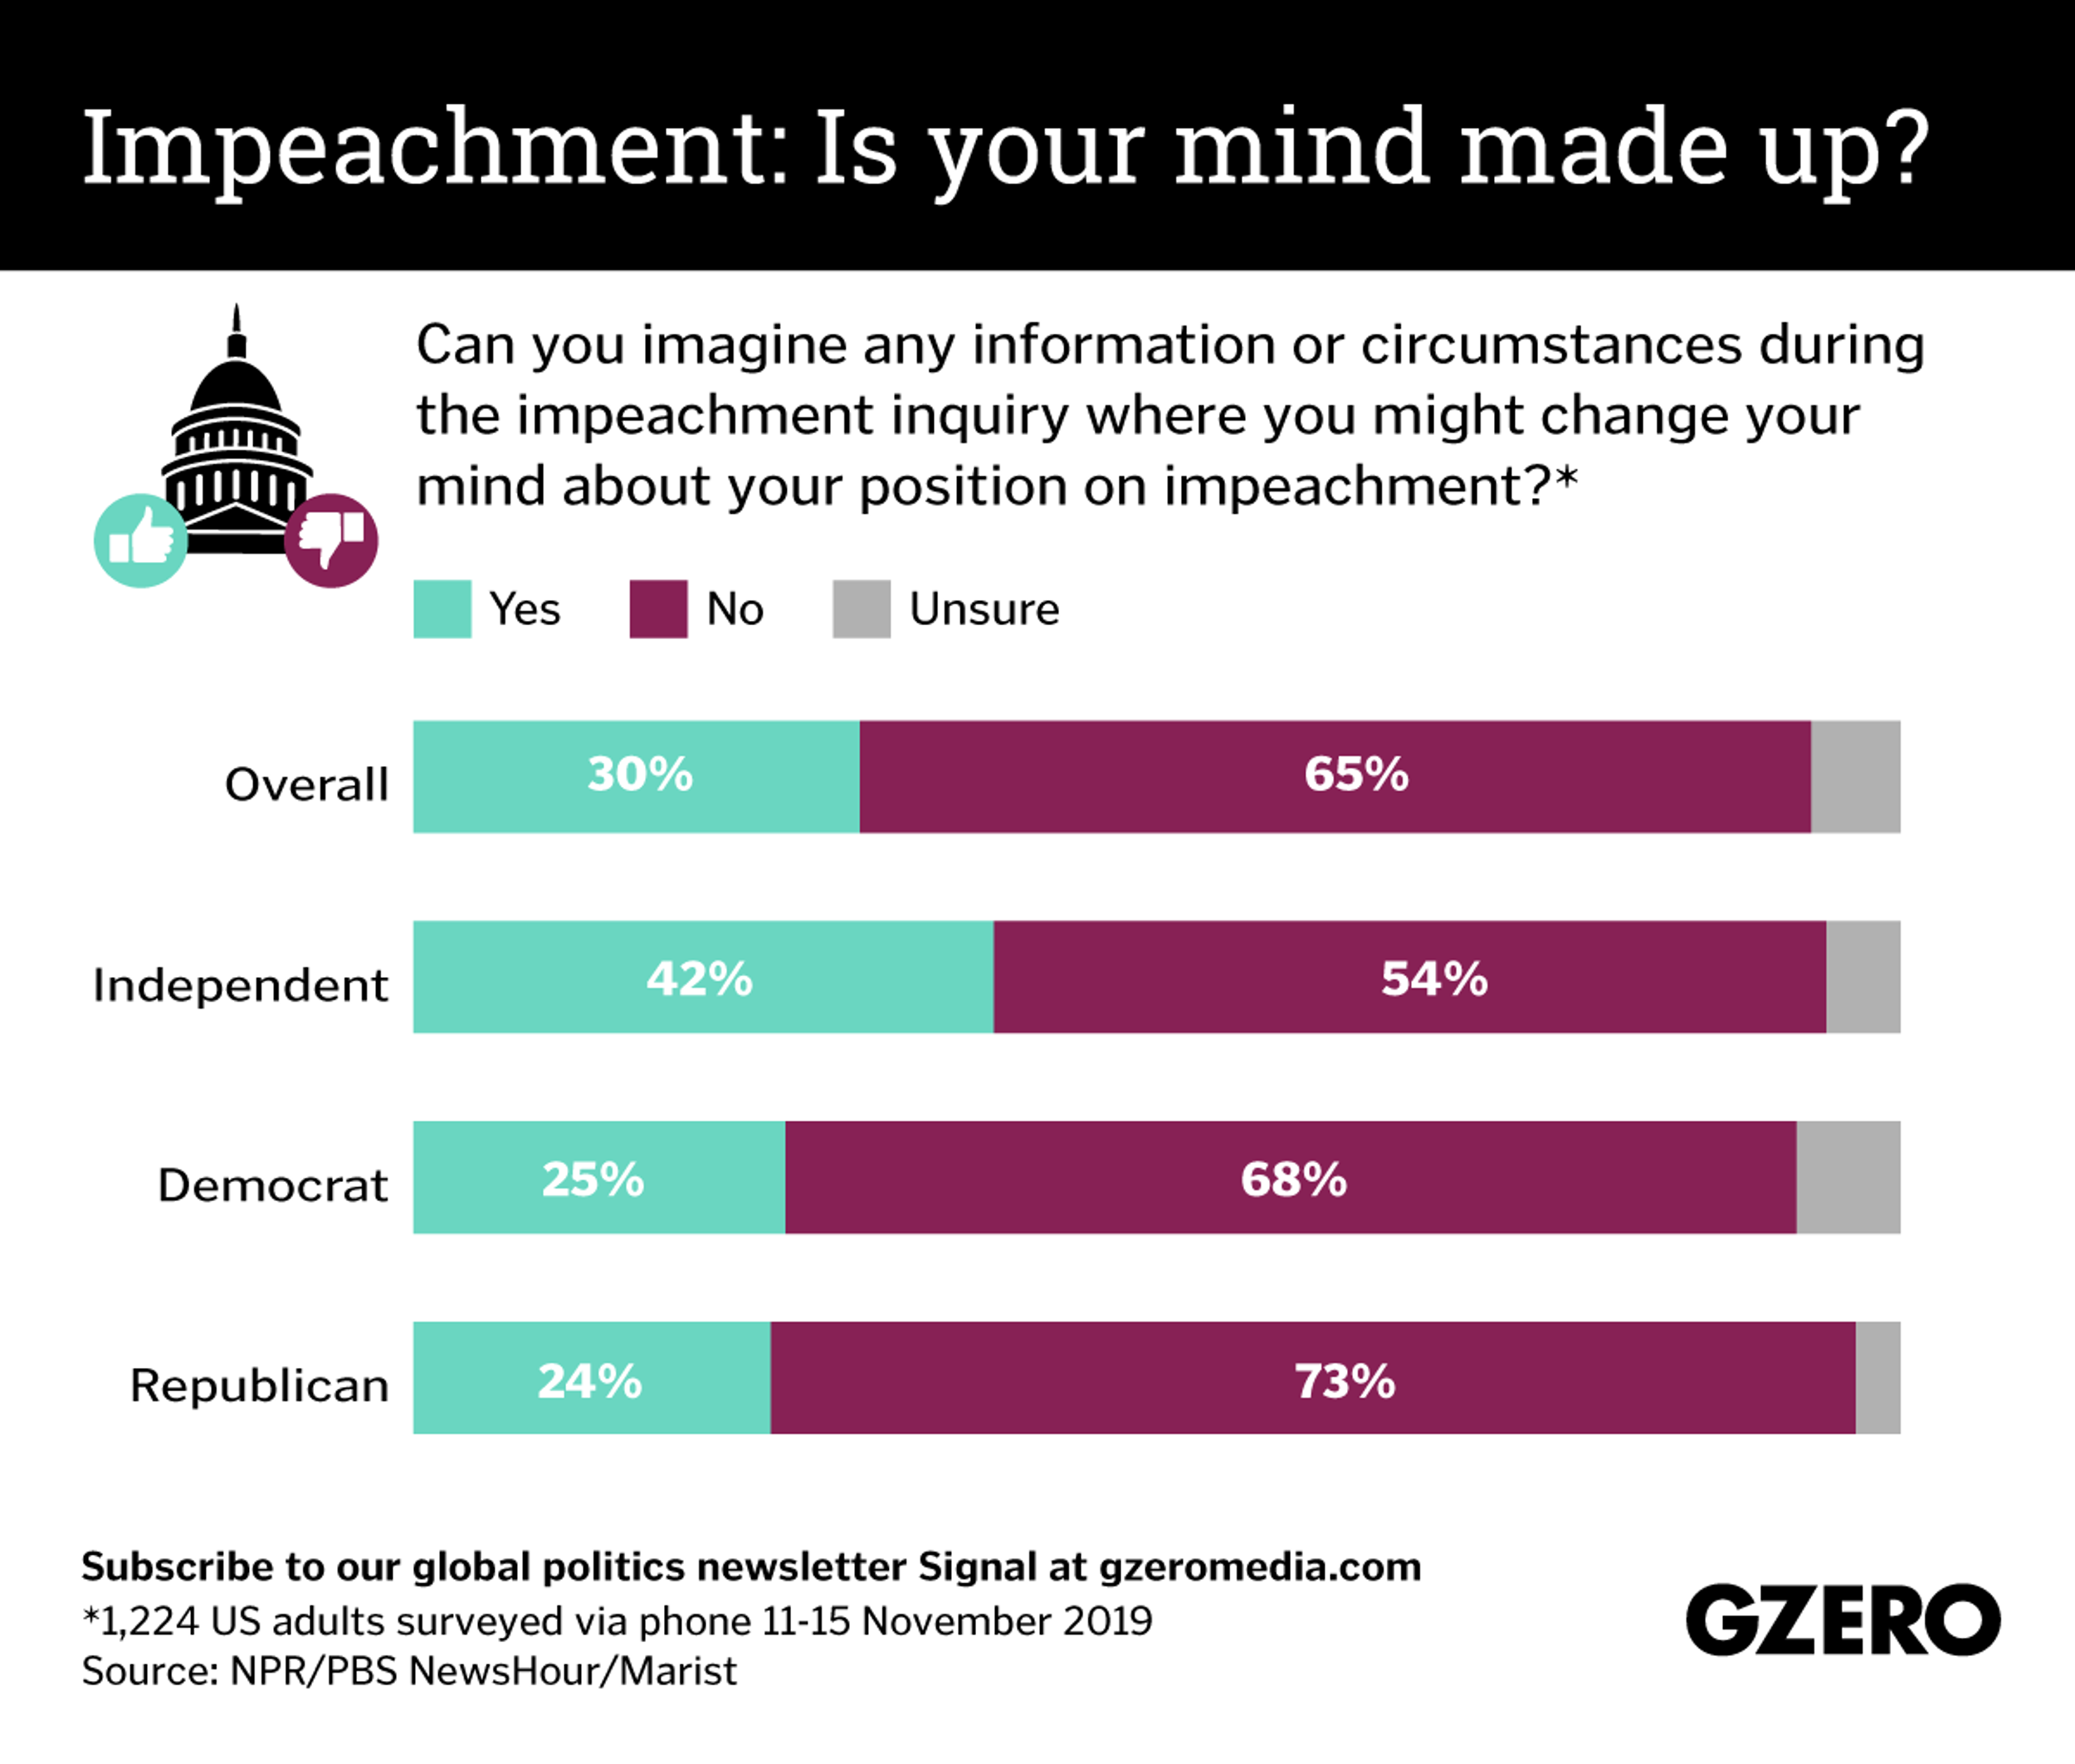 Graphic Truth: Is your mind made up on impeachment?